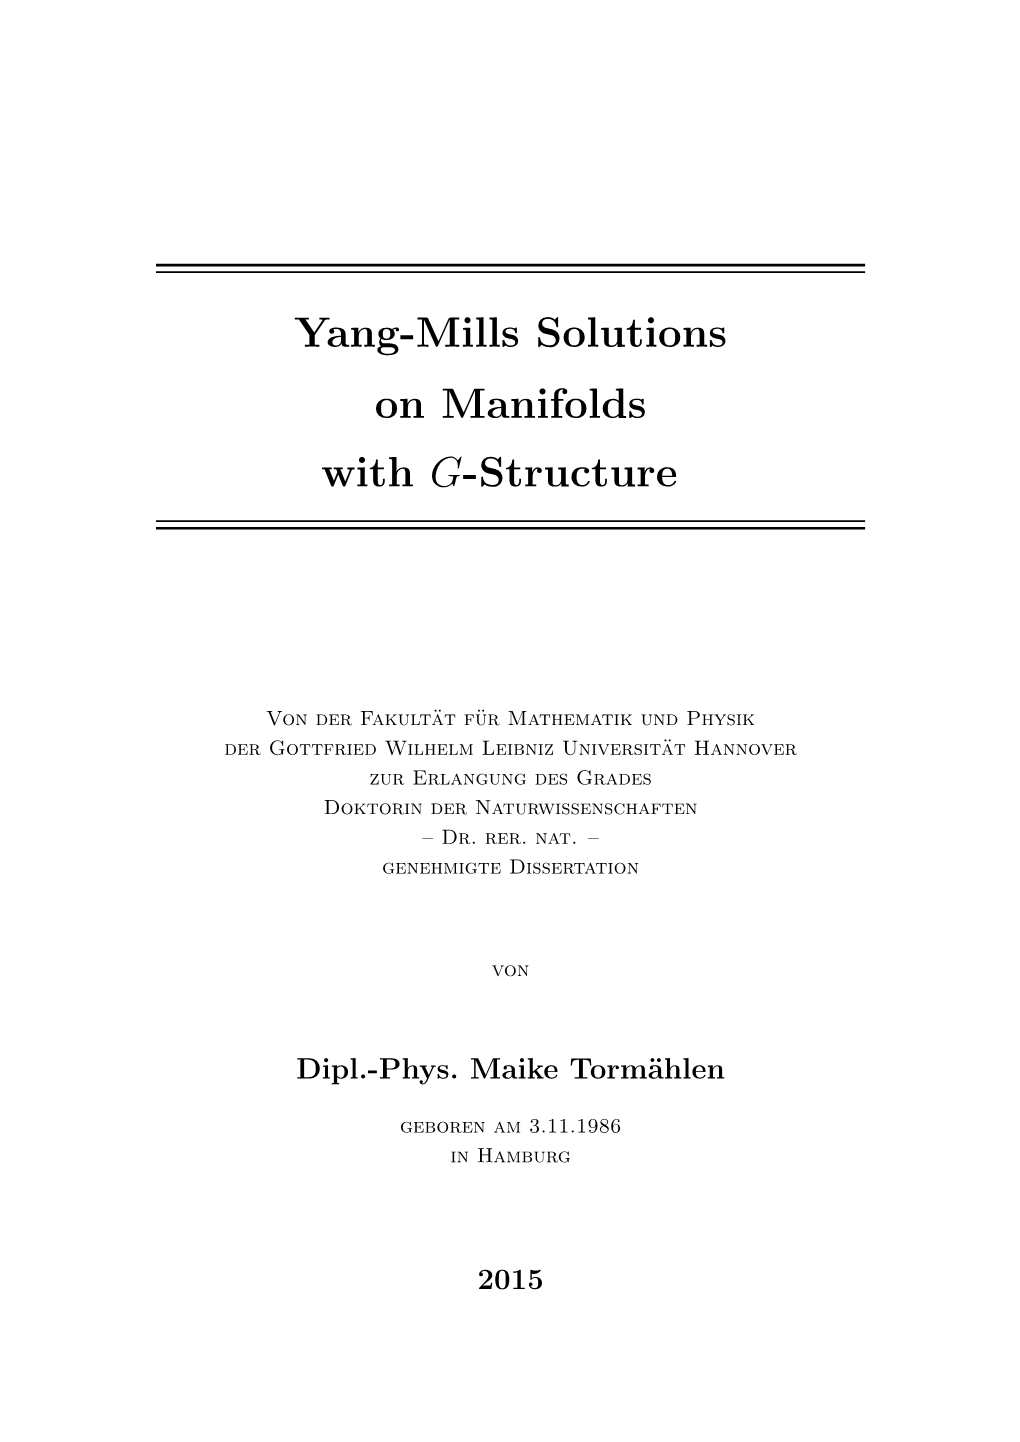 Yang-Mills Solutions on Manifolds with G-Structure